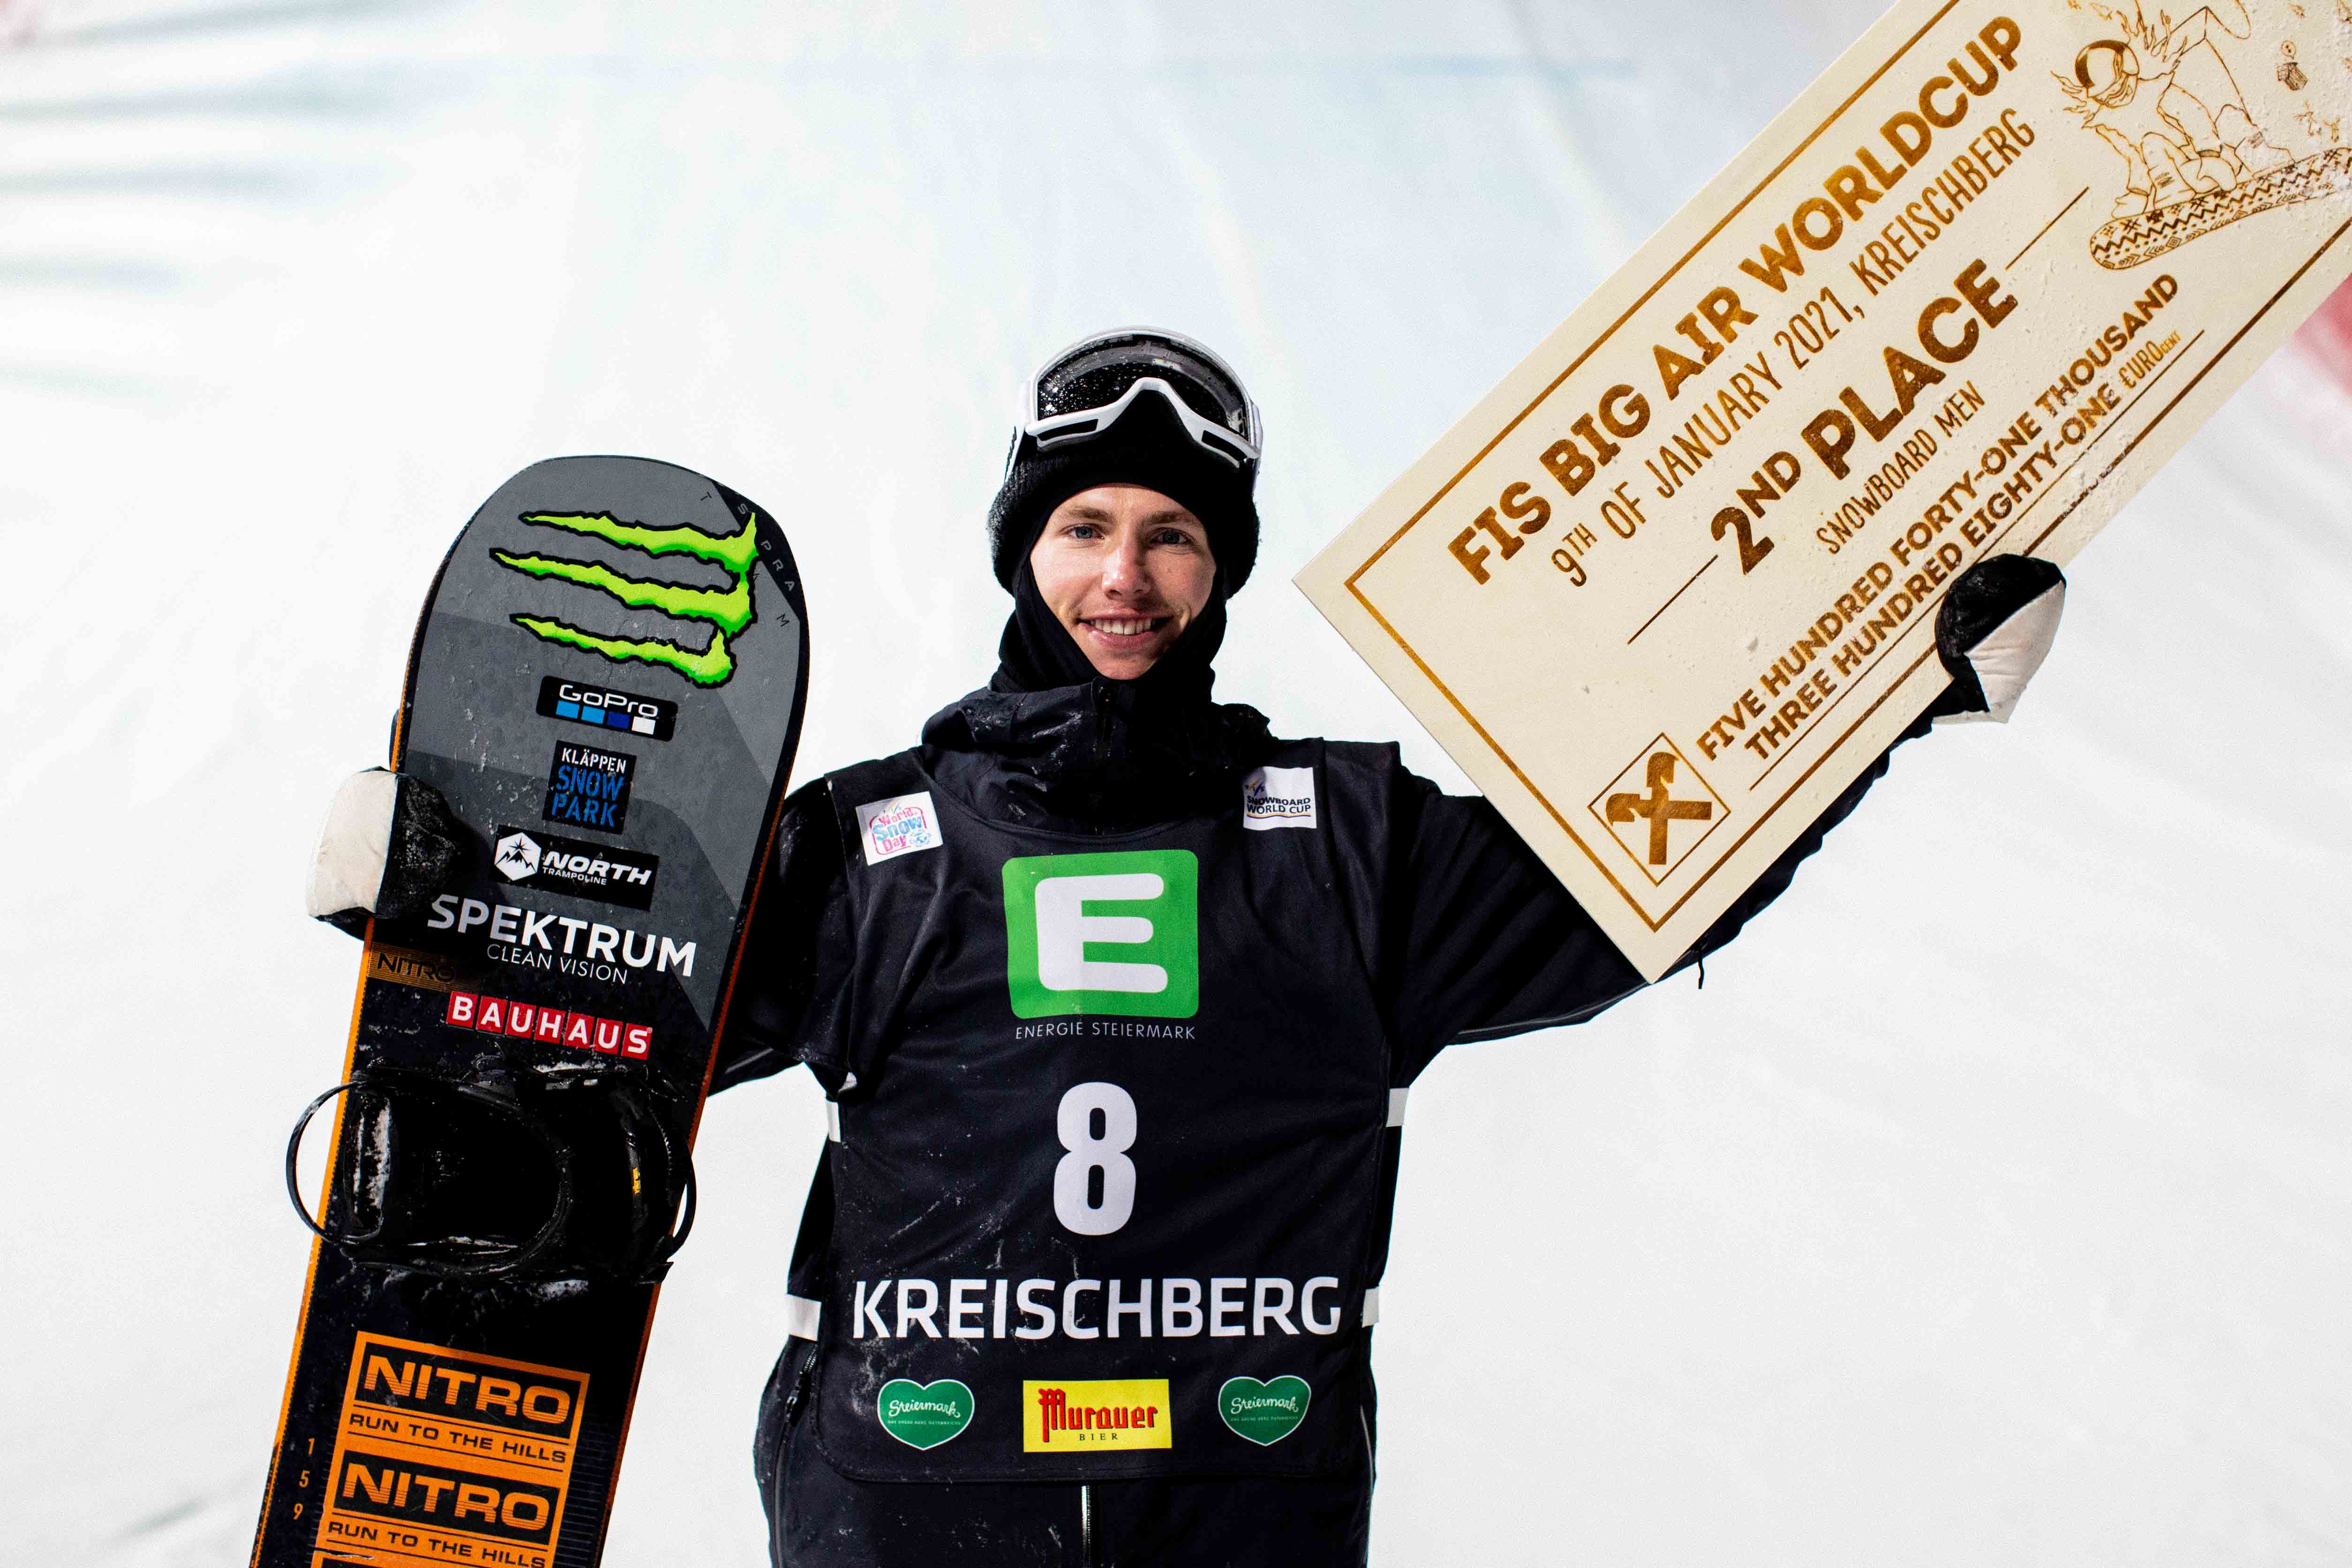 Monster Energy's Sven Thorgren Claims Silver in Snowboard Big Air at the FIS Snowboard Park & Pipe World Cup in Kreischberg, Austria